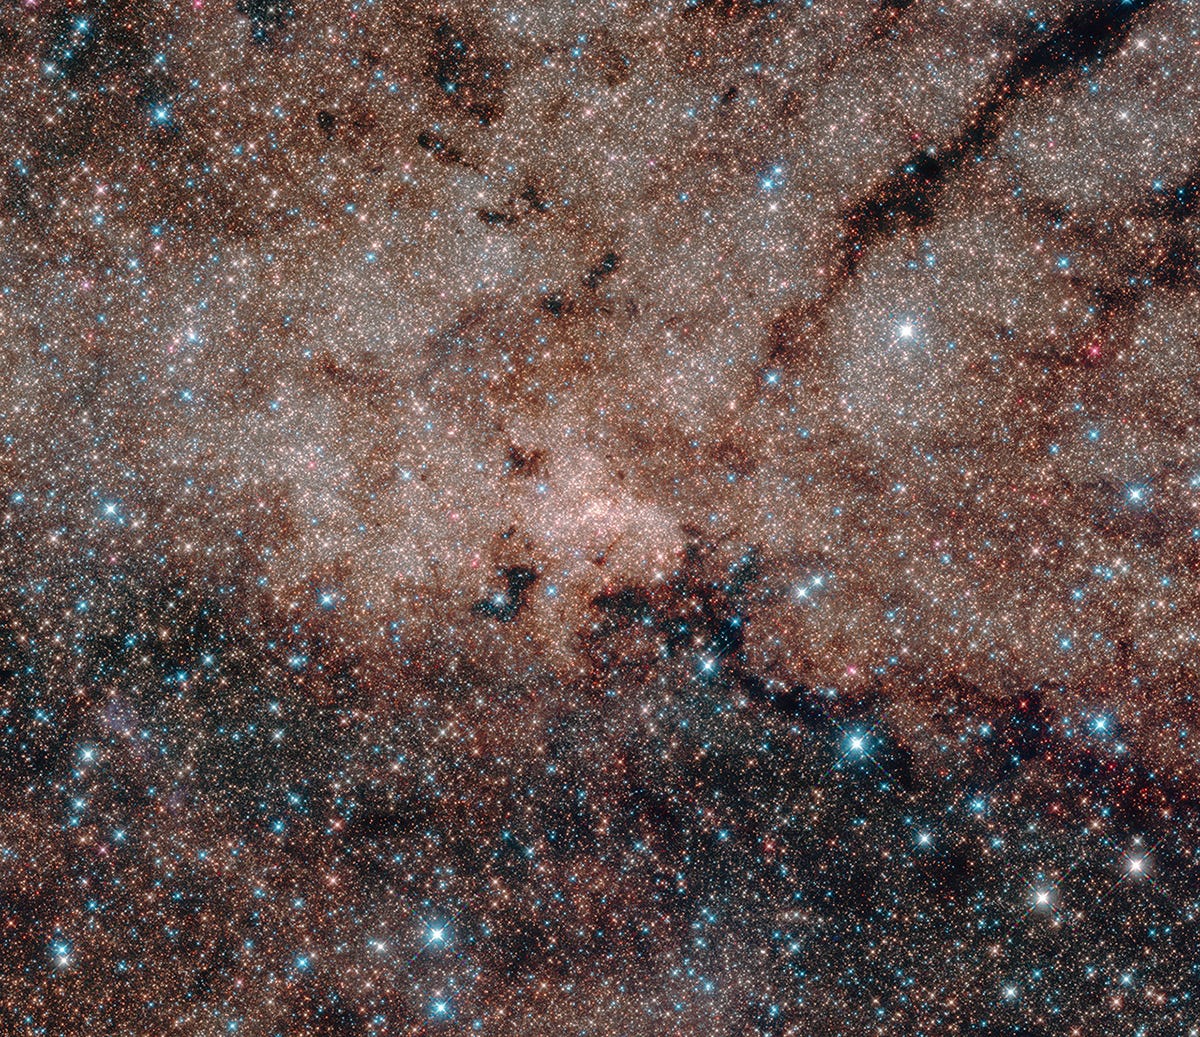 A field of stars at the centre of the Milky Way galaxy, showing a dusty red cloud and blue foreground stars